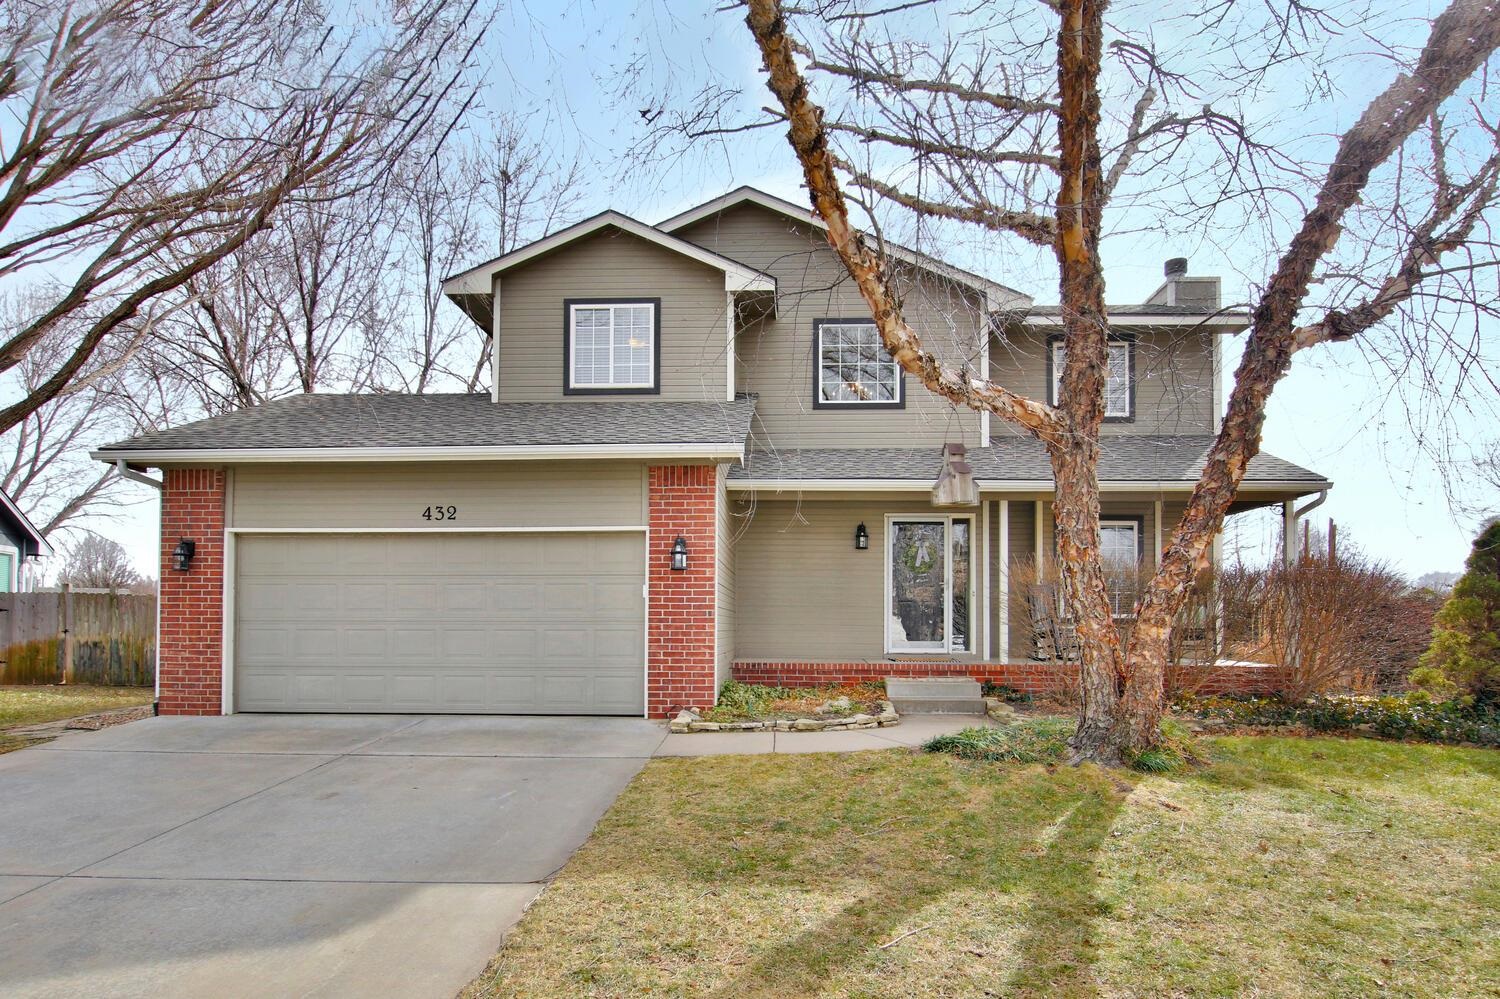 ALL OFFERS WILL BE REVIEWED AT 5:00 P.M., Friday, January 21st.  This classic two story perfectly em